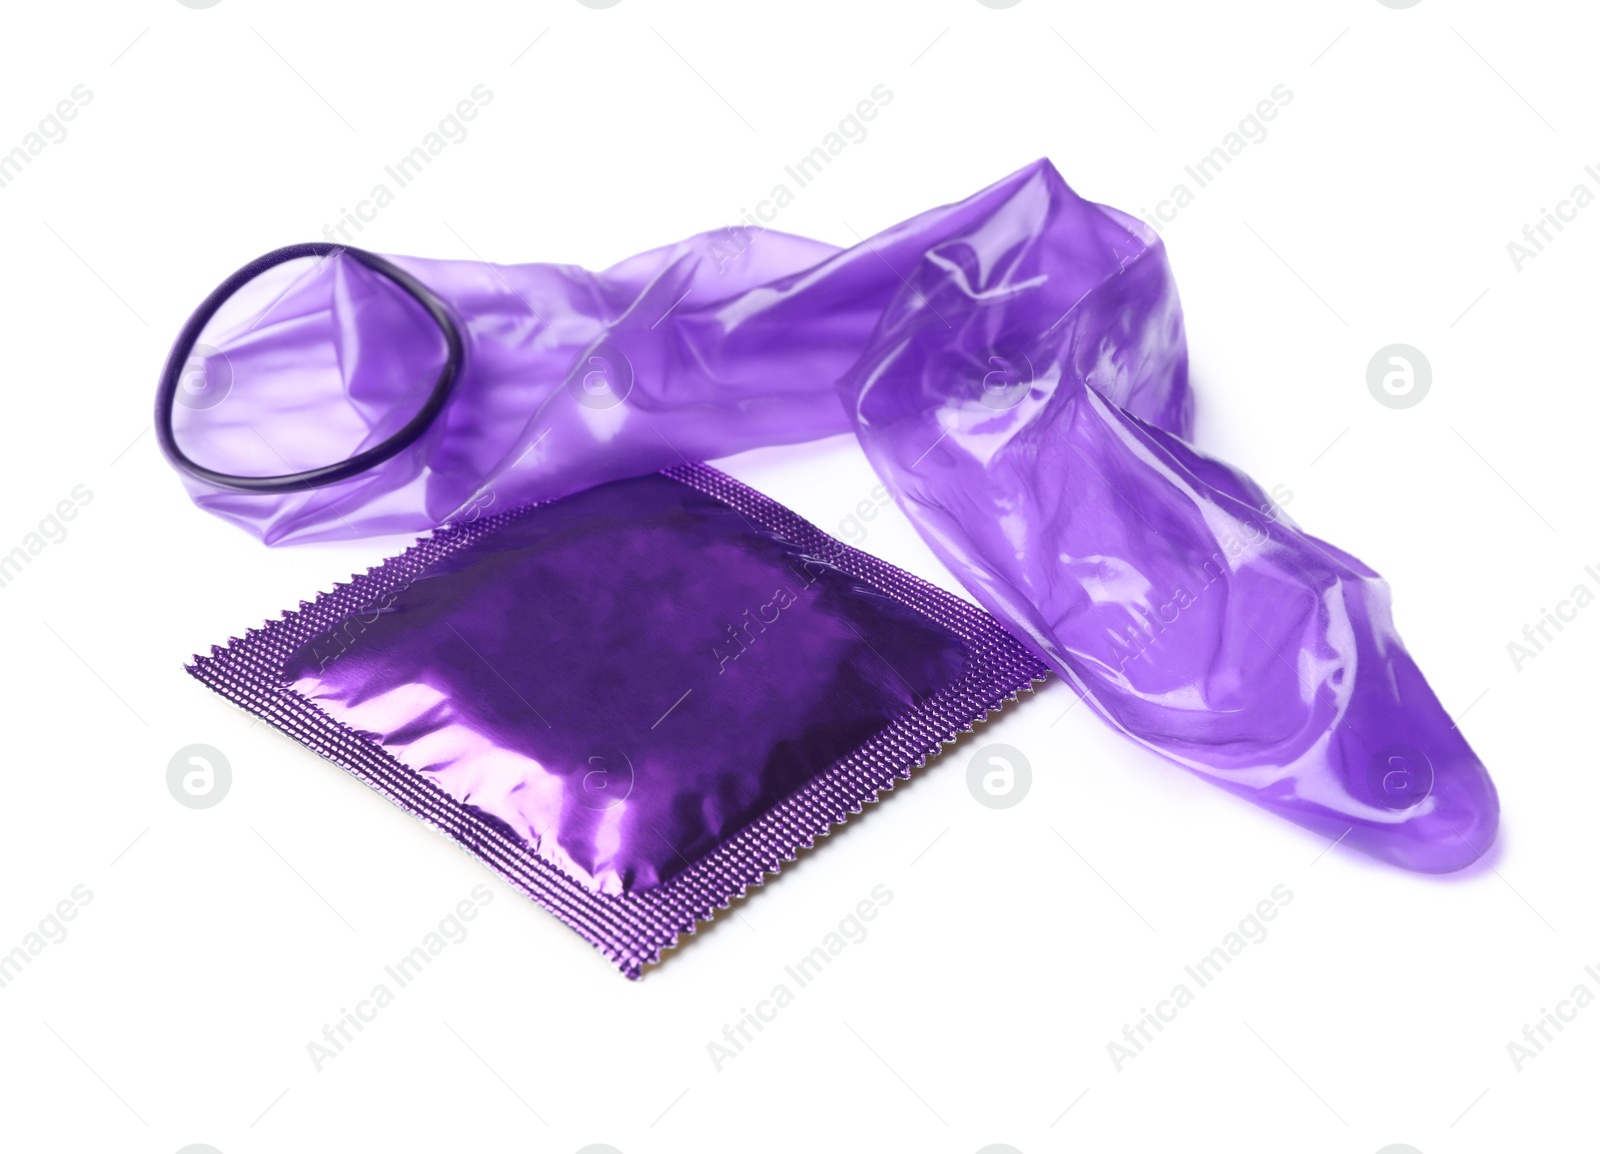 Image of Unrolled violet condom and package on white background. Safe sex